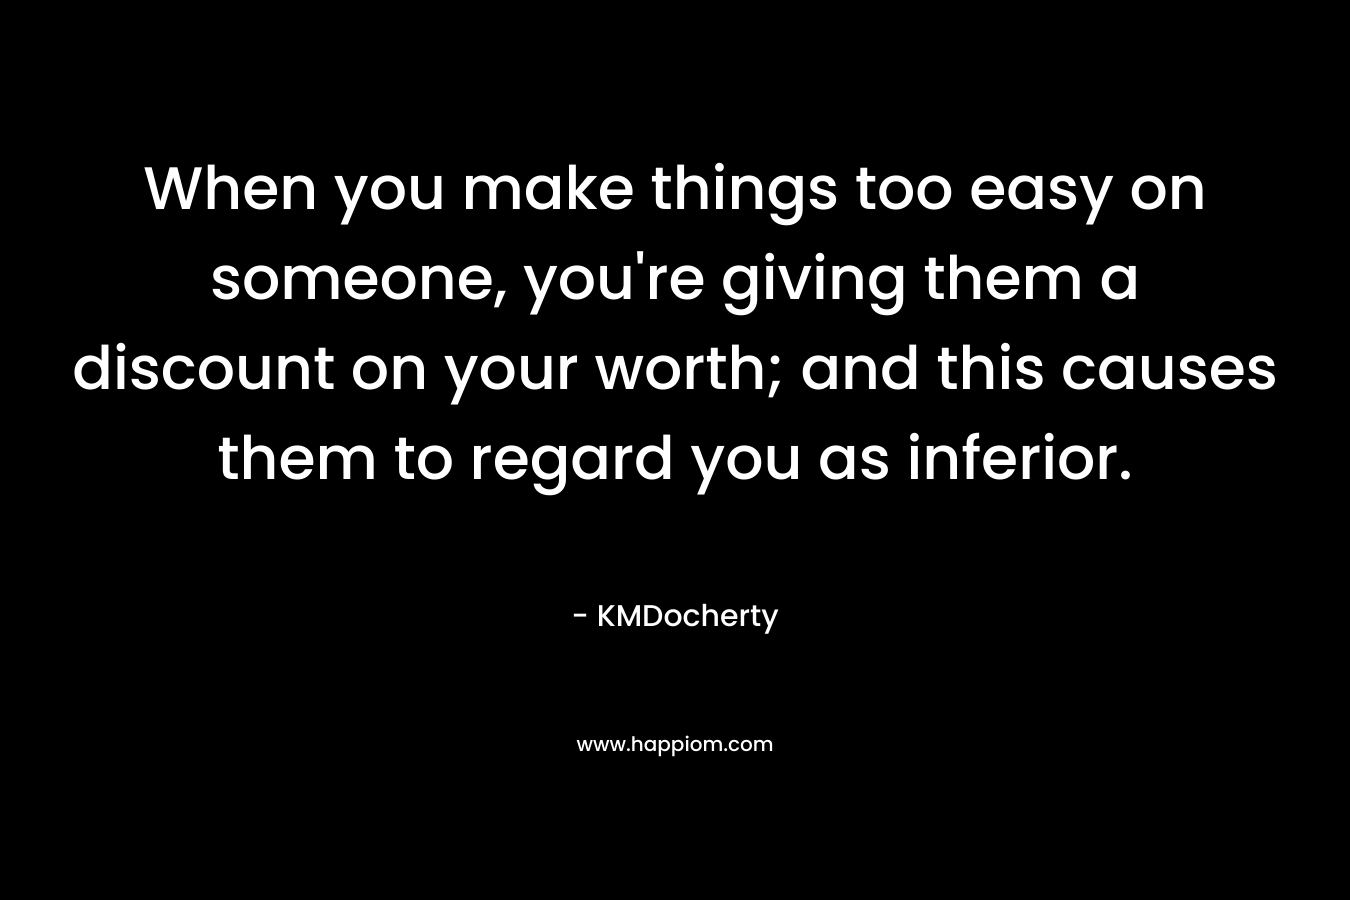 When you make things too easy on someone, you're giving them a discount on your worth; and this causes them to regard you as inferior.